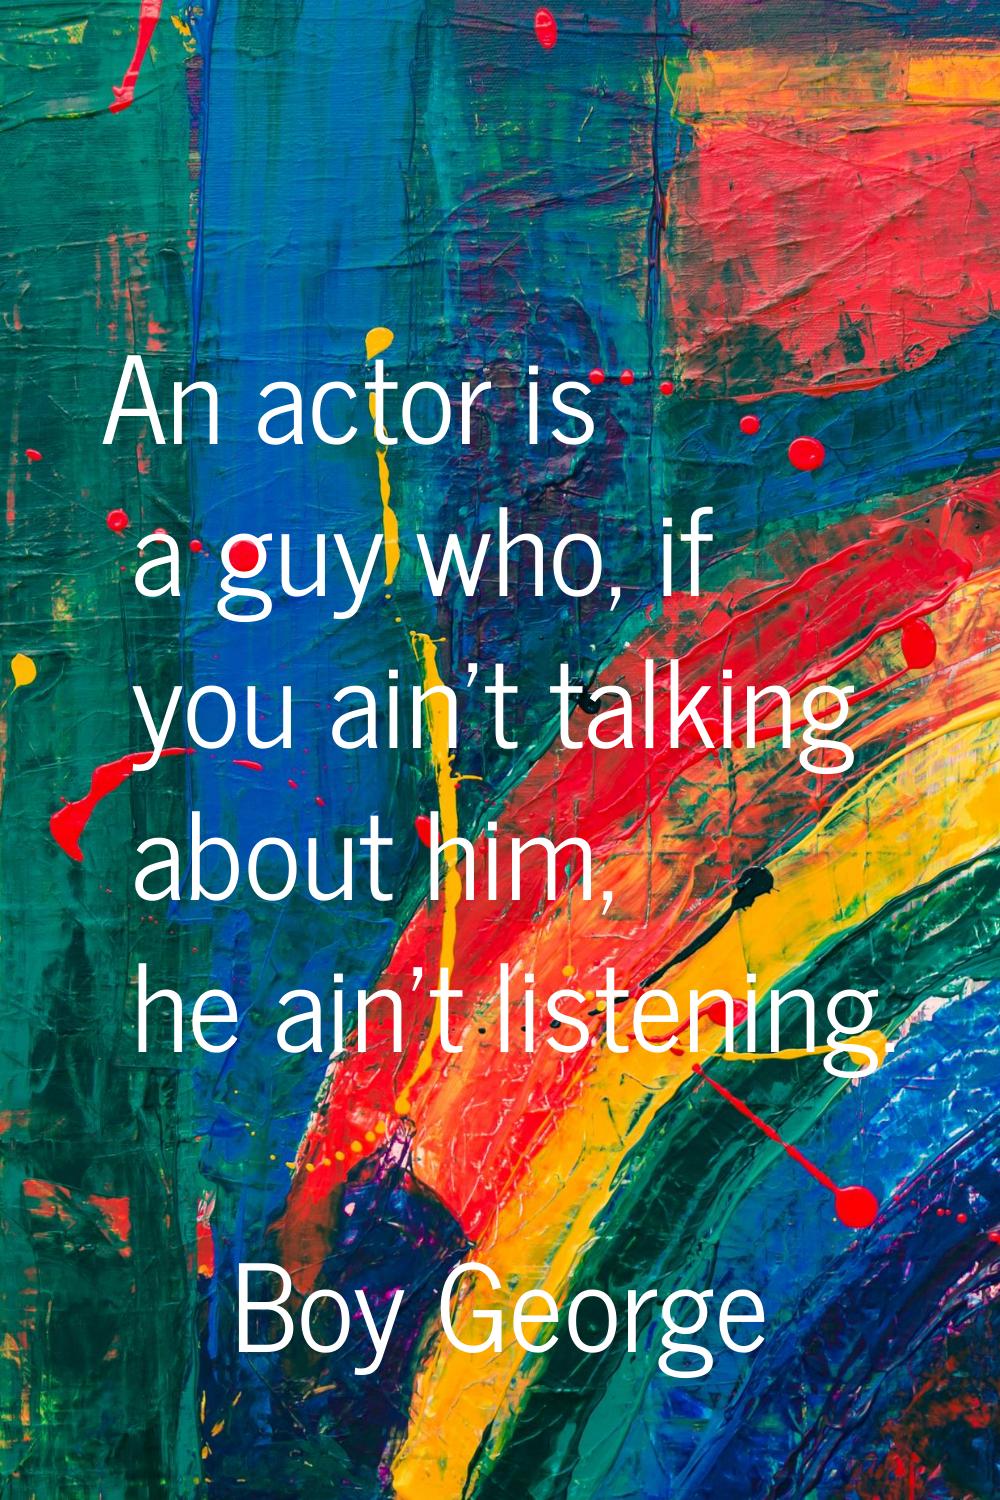 An actor is a guy who, if you ain't talking about him, he ain't listening.